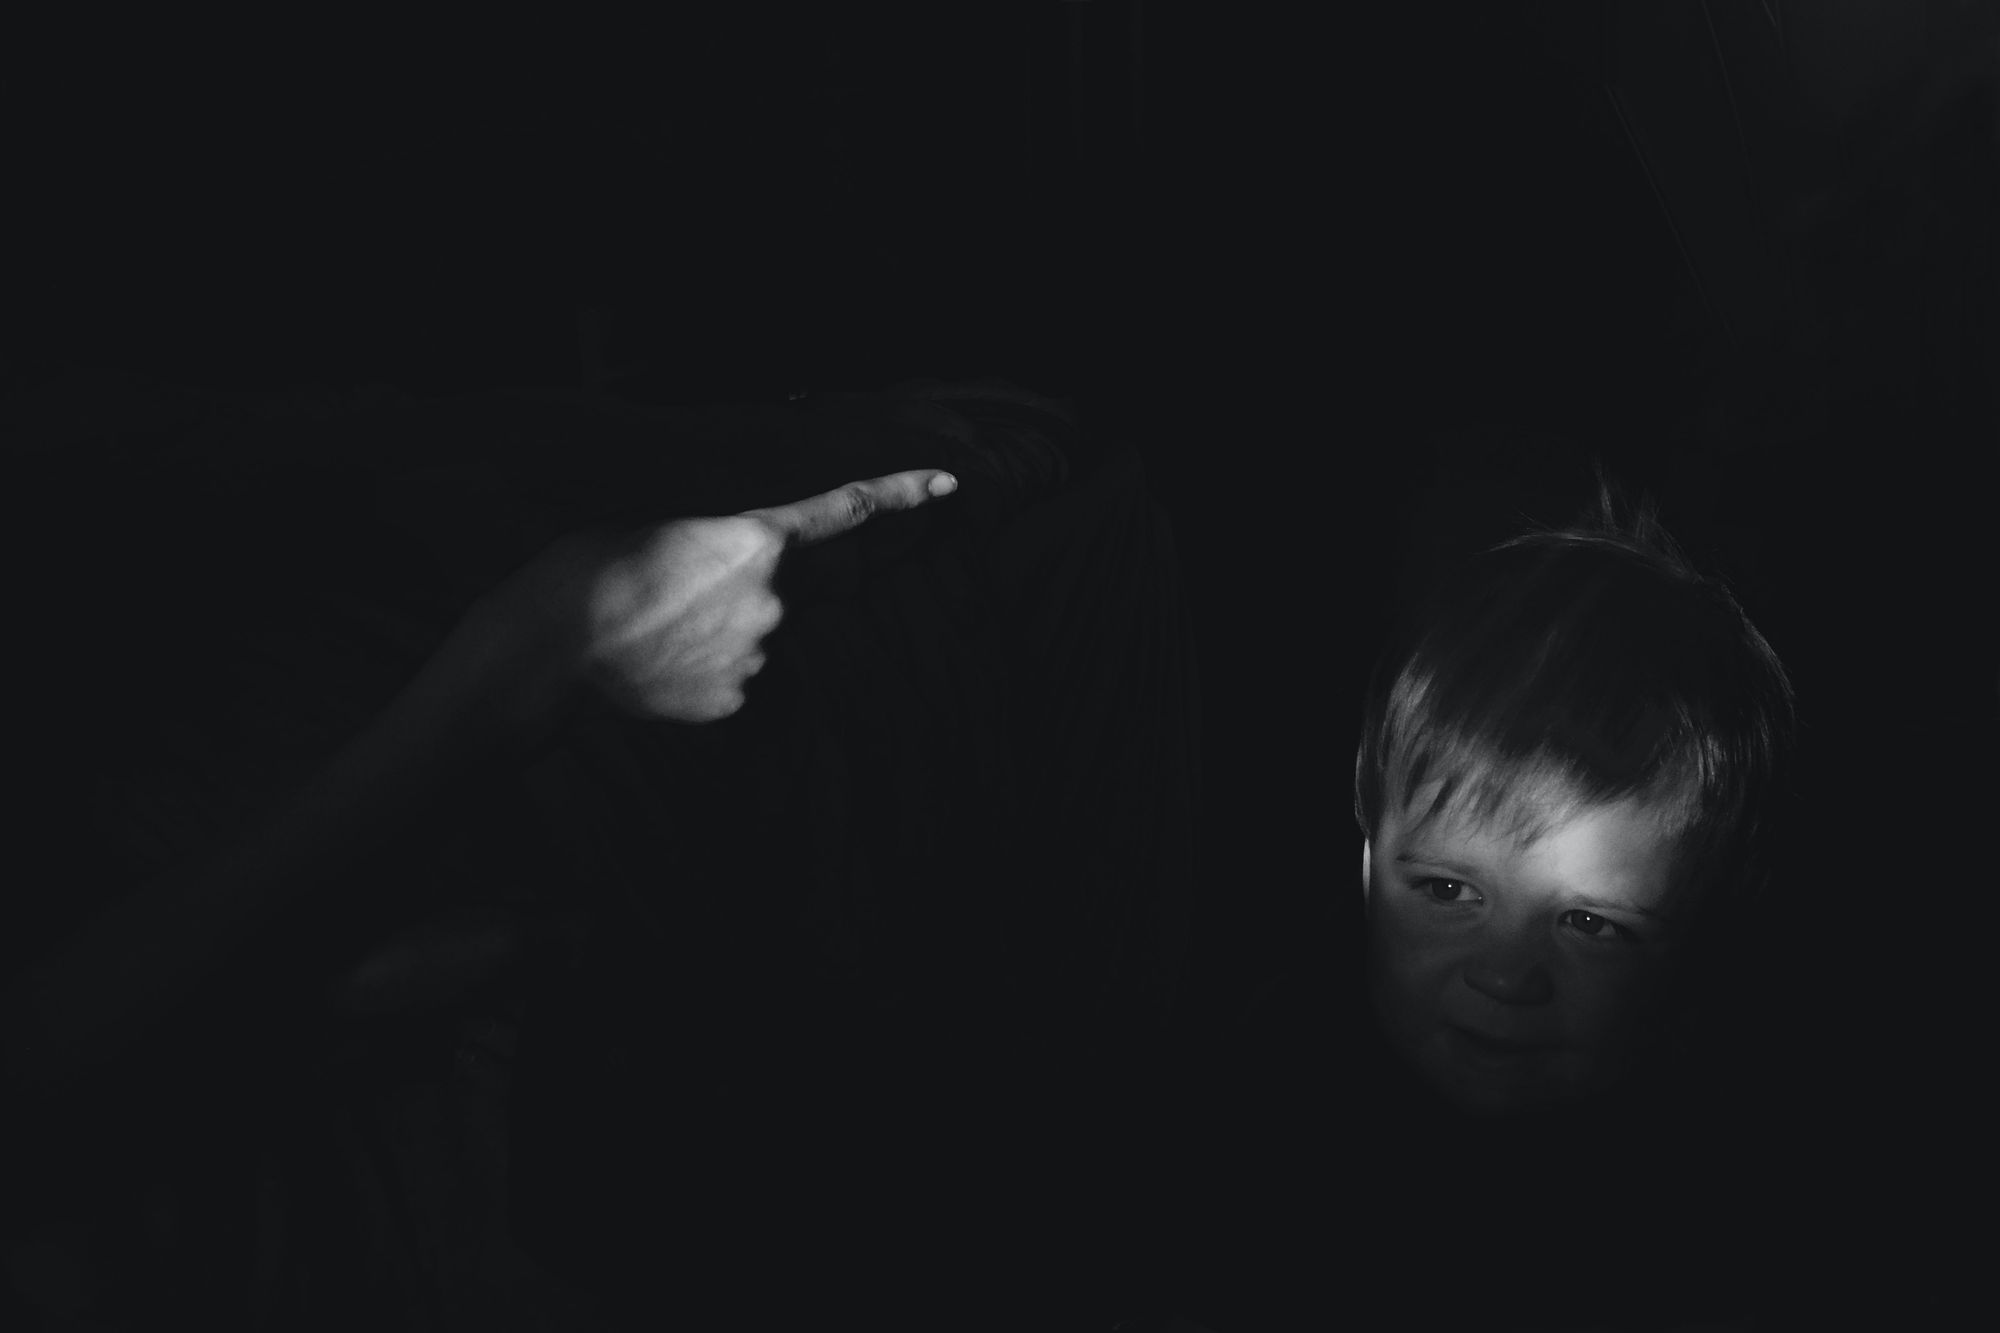 Black & white photo of child's face and adult pointing at him